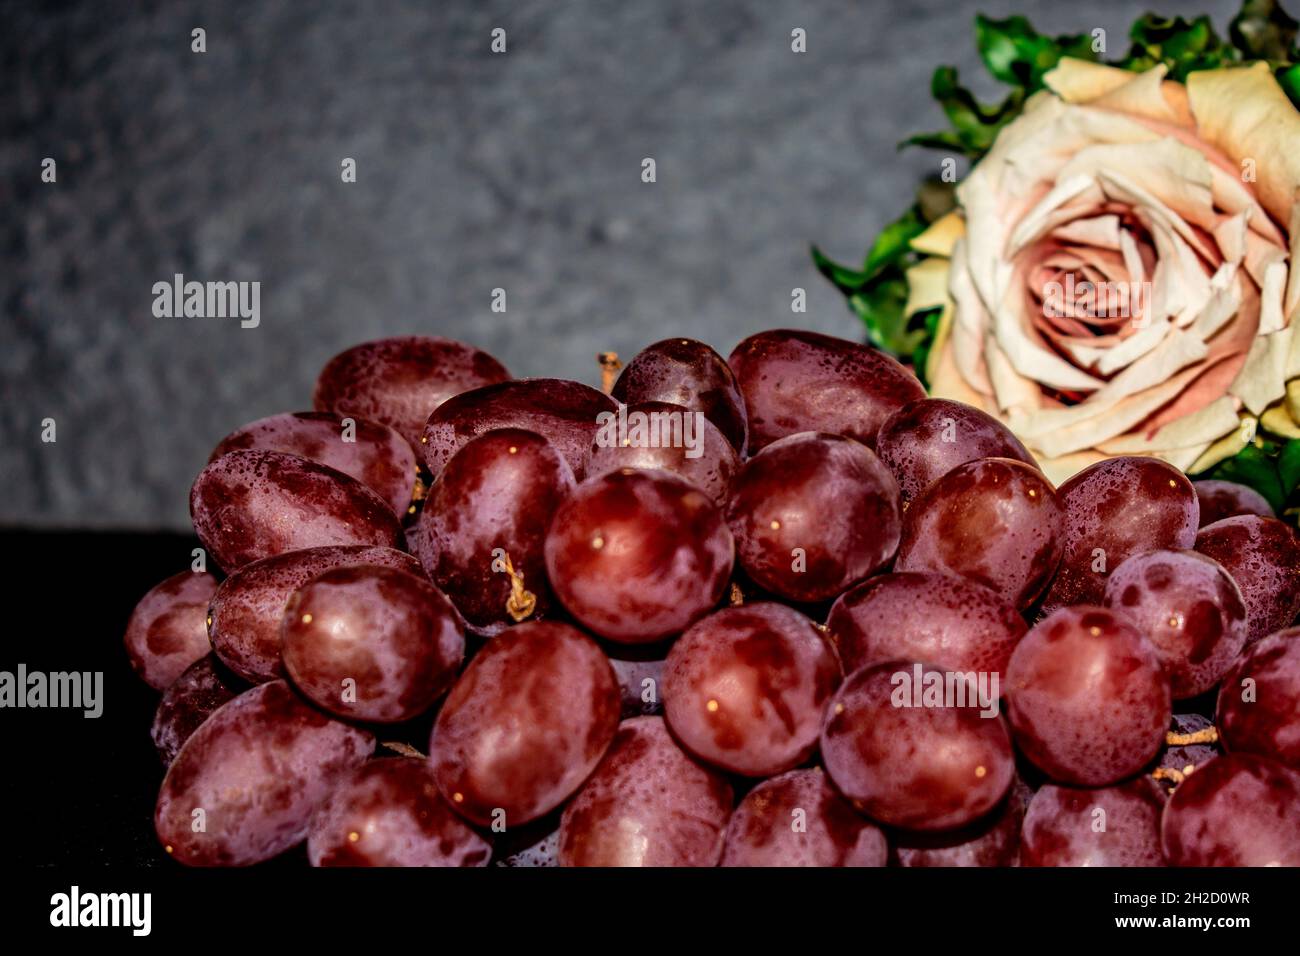 Fruit : Fresh red grapes Stock Photo